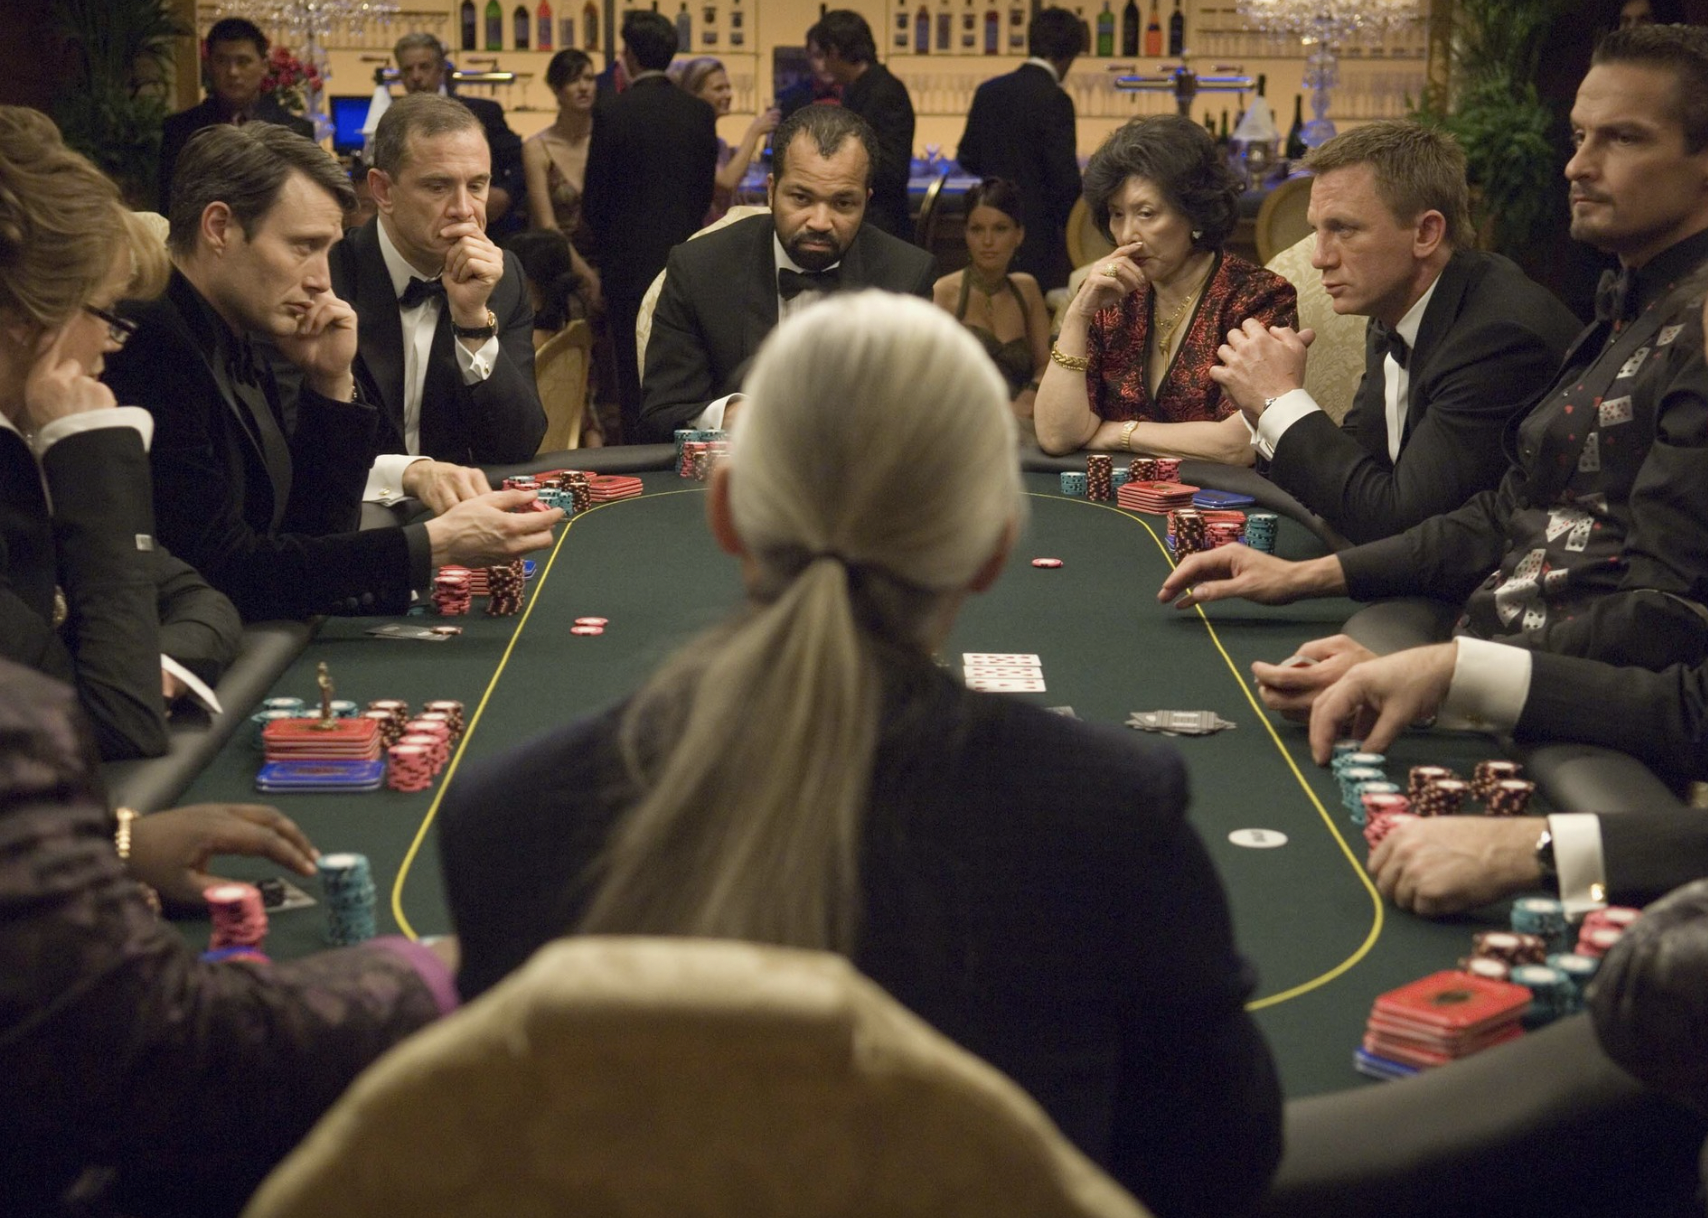 Around the poker table of a scene in "Casino Royale"